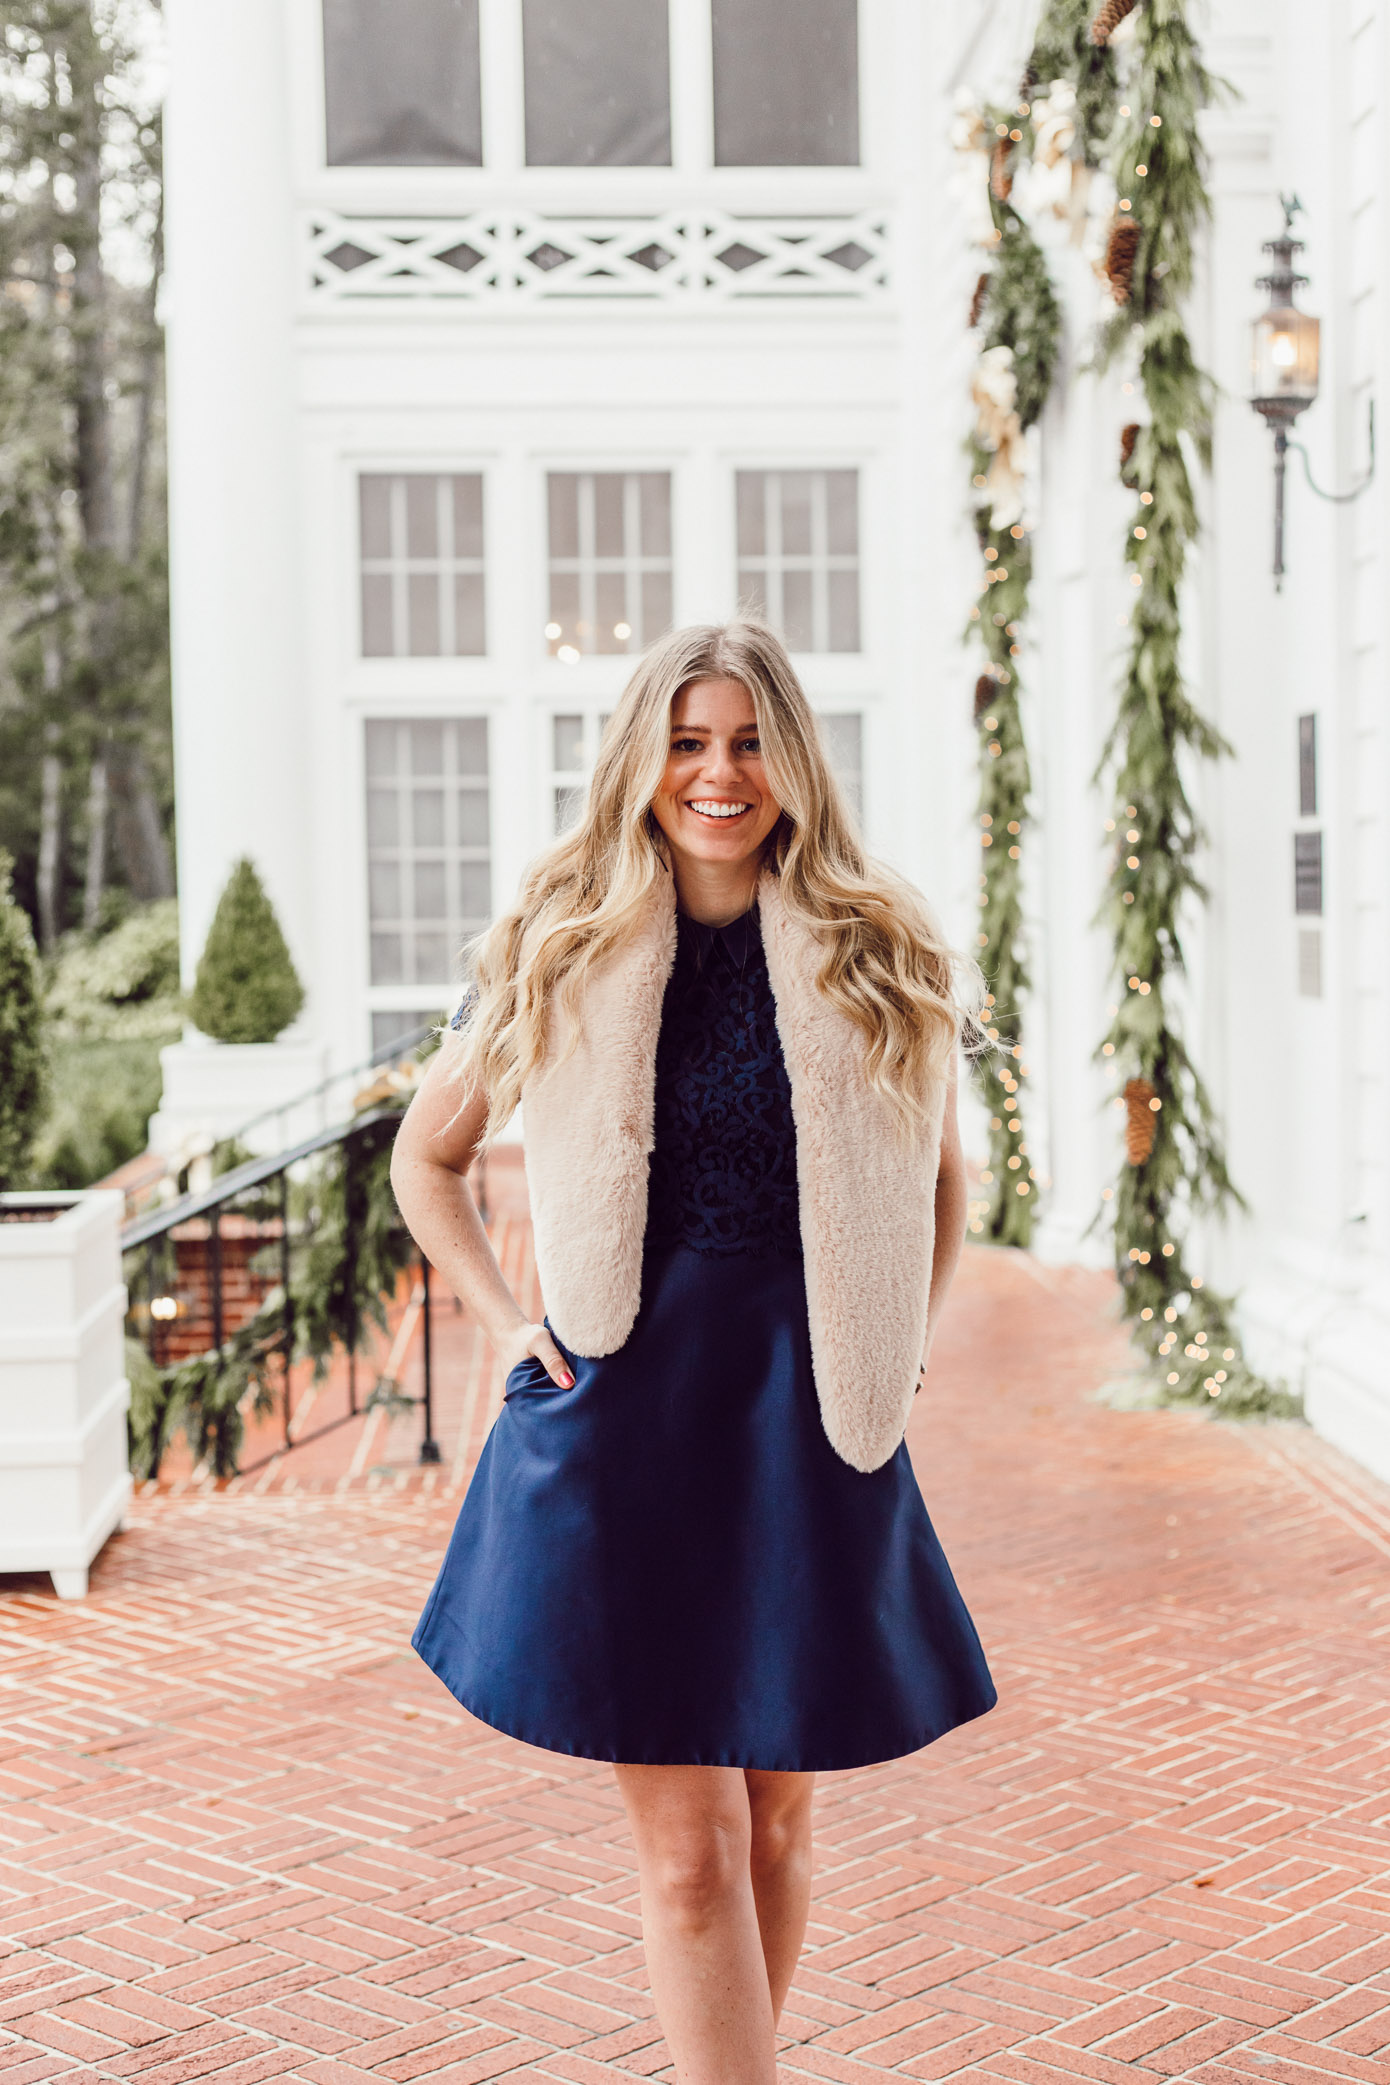 Finding the Perfect Holiday Party Dress with Rent the Runway on Louella Reese Life & Style Blog | Navy Lace Mini Dress, Christmas Party Dress, Faux Fur Stole